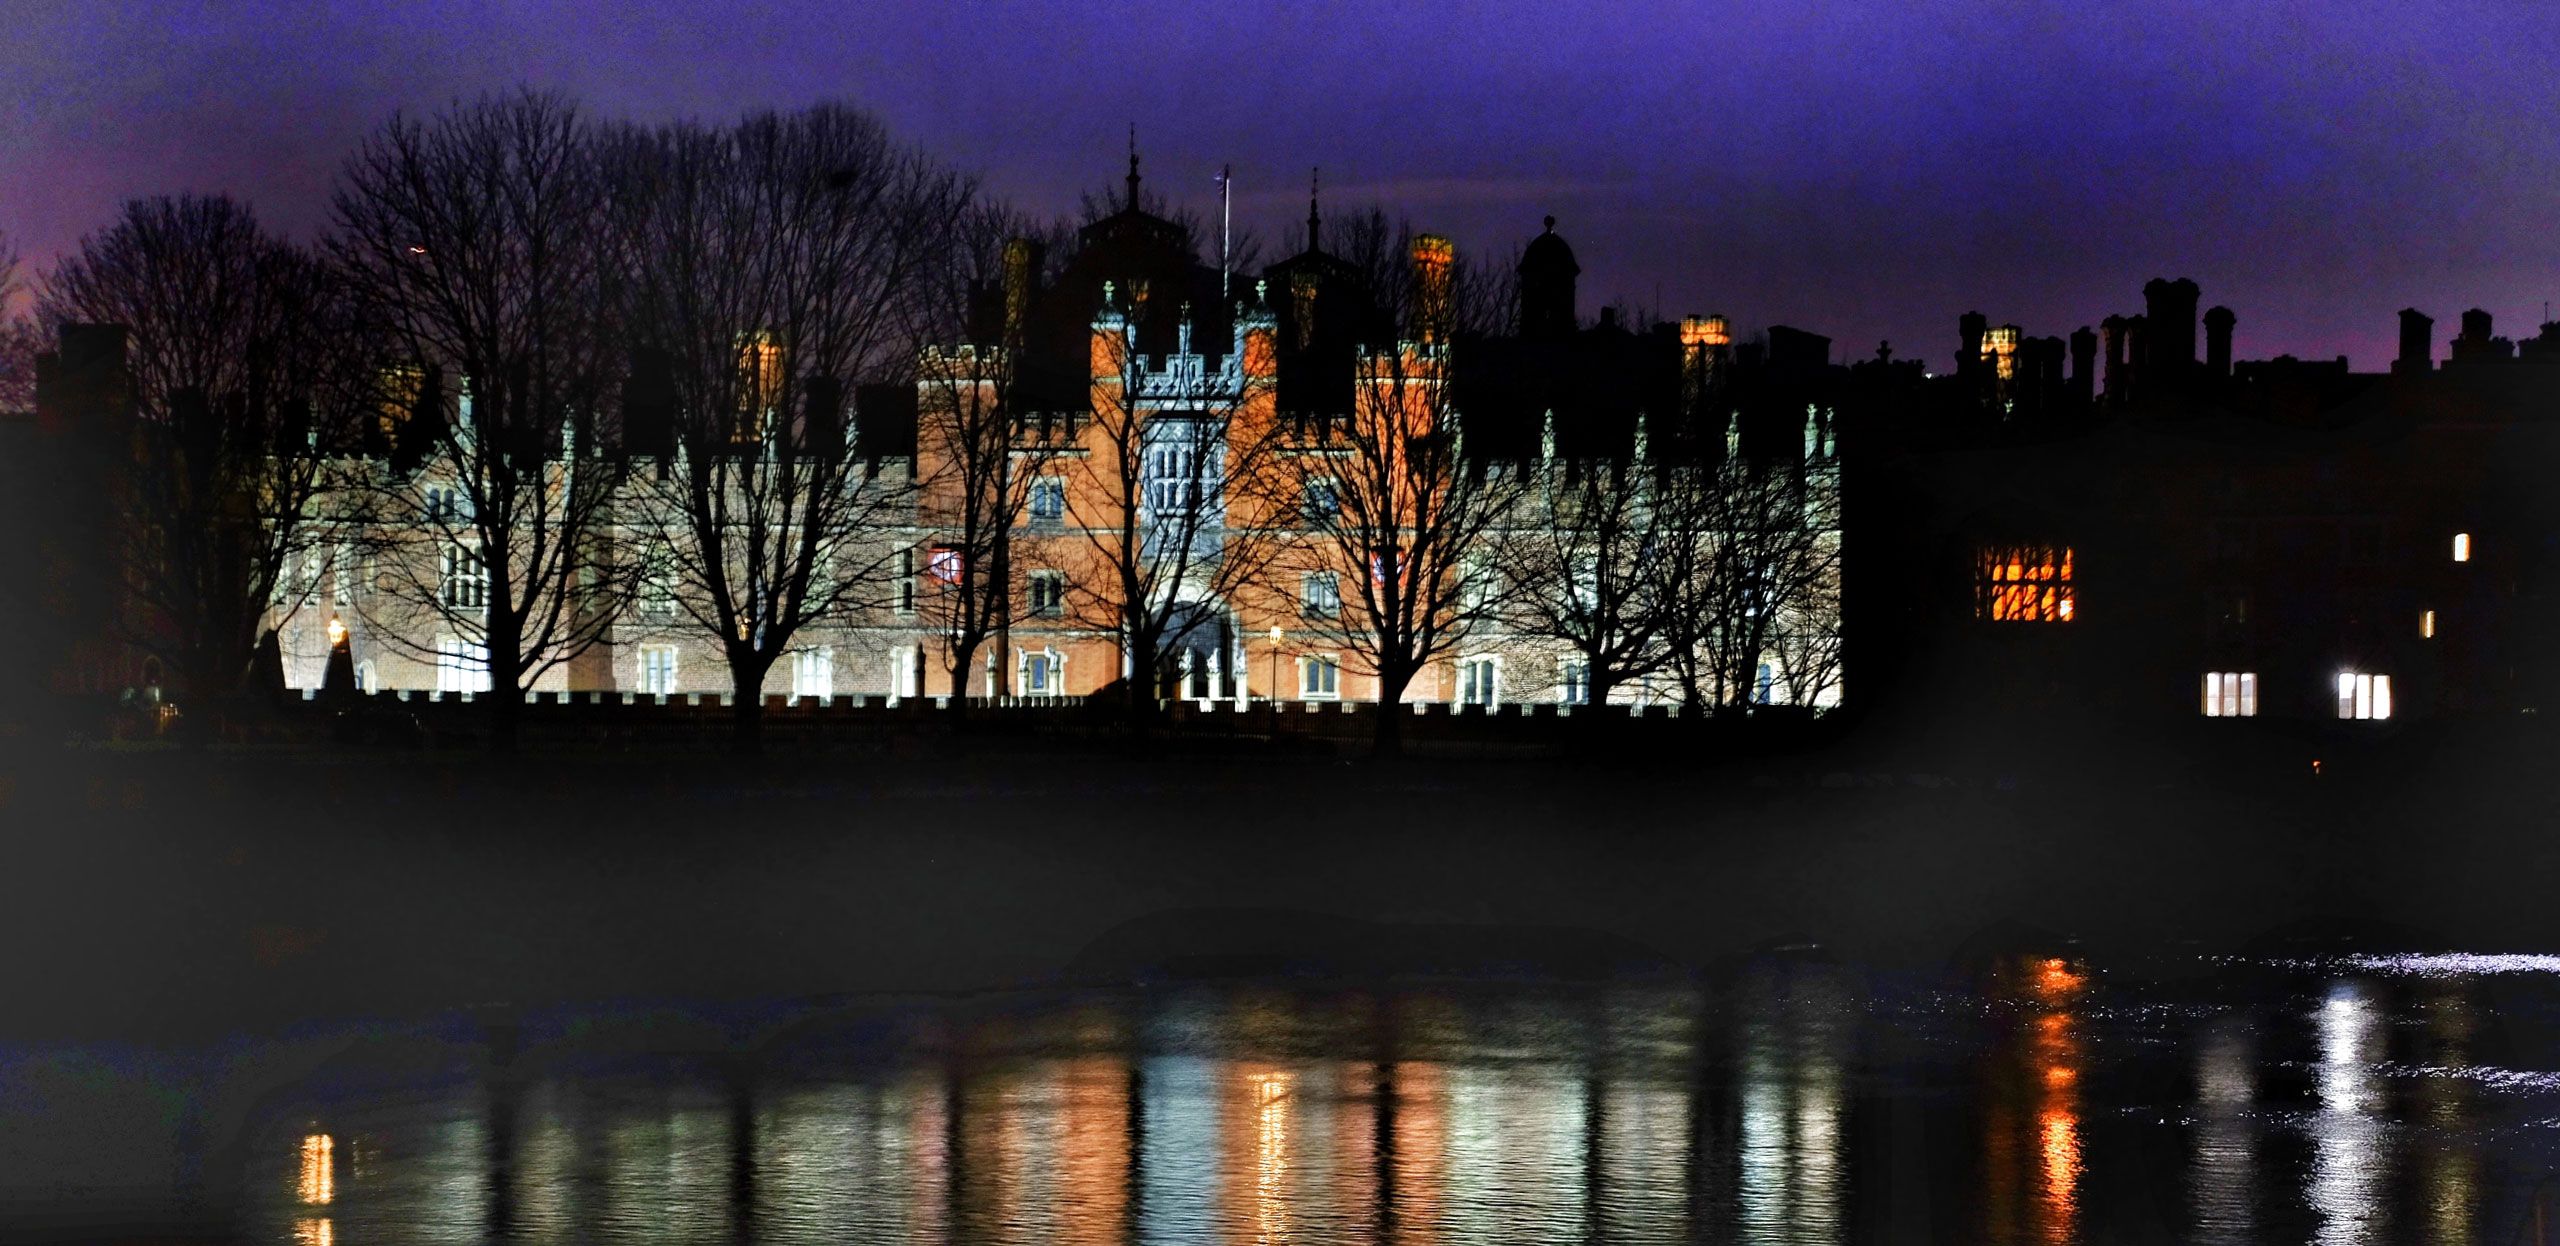 A view across the Thames to Hampton Court Palace at night image.